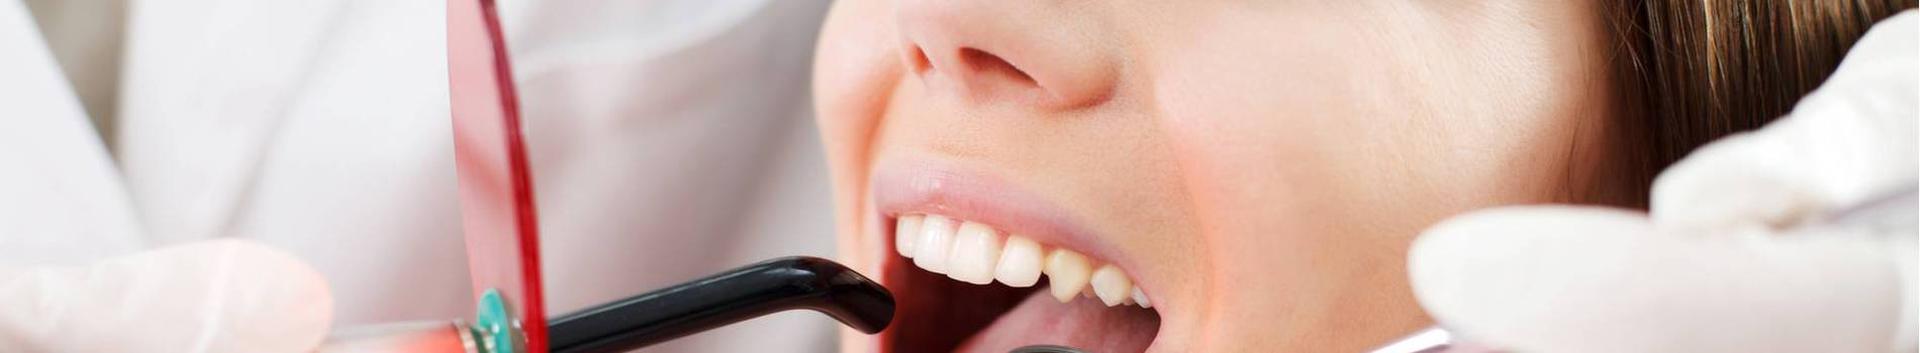 Dental Surgery and other related services, products, consultations